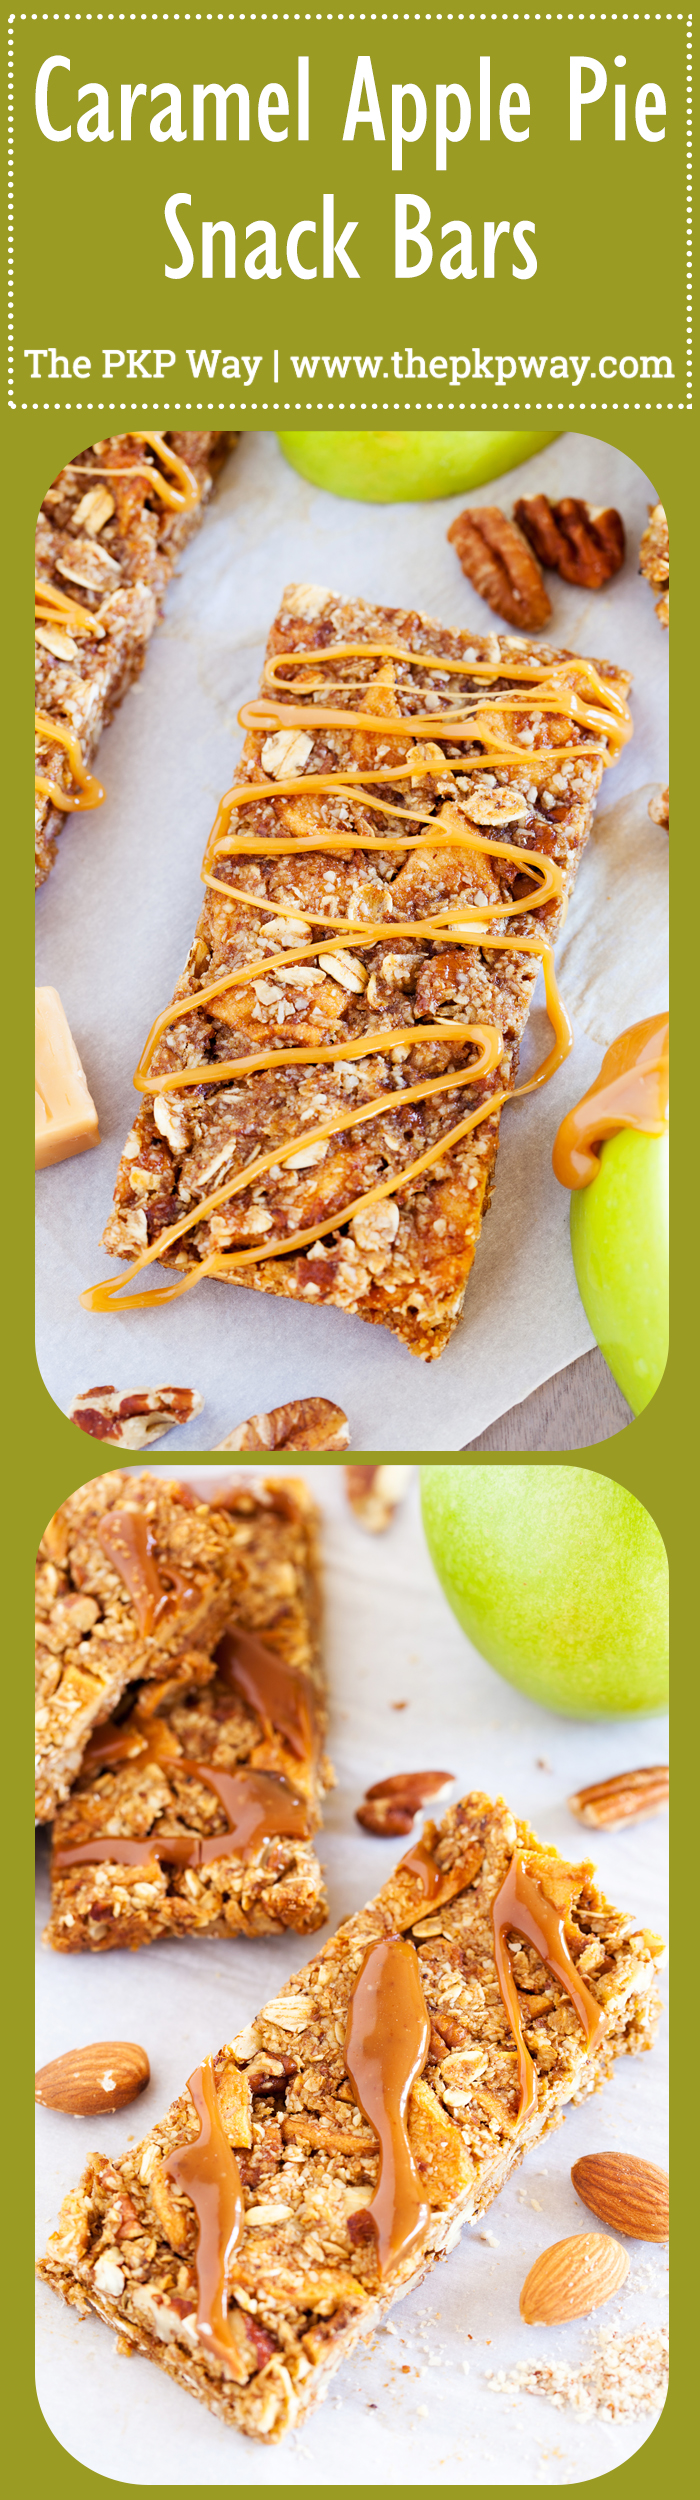 Full of crunchy pecans, chewy apples, and a caramel ribbon, these Caramel Apple Pie Snack Bars are the next best thing to an apple pie without the fuss of the crust.